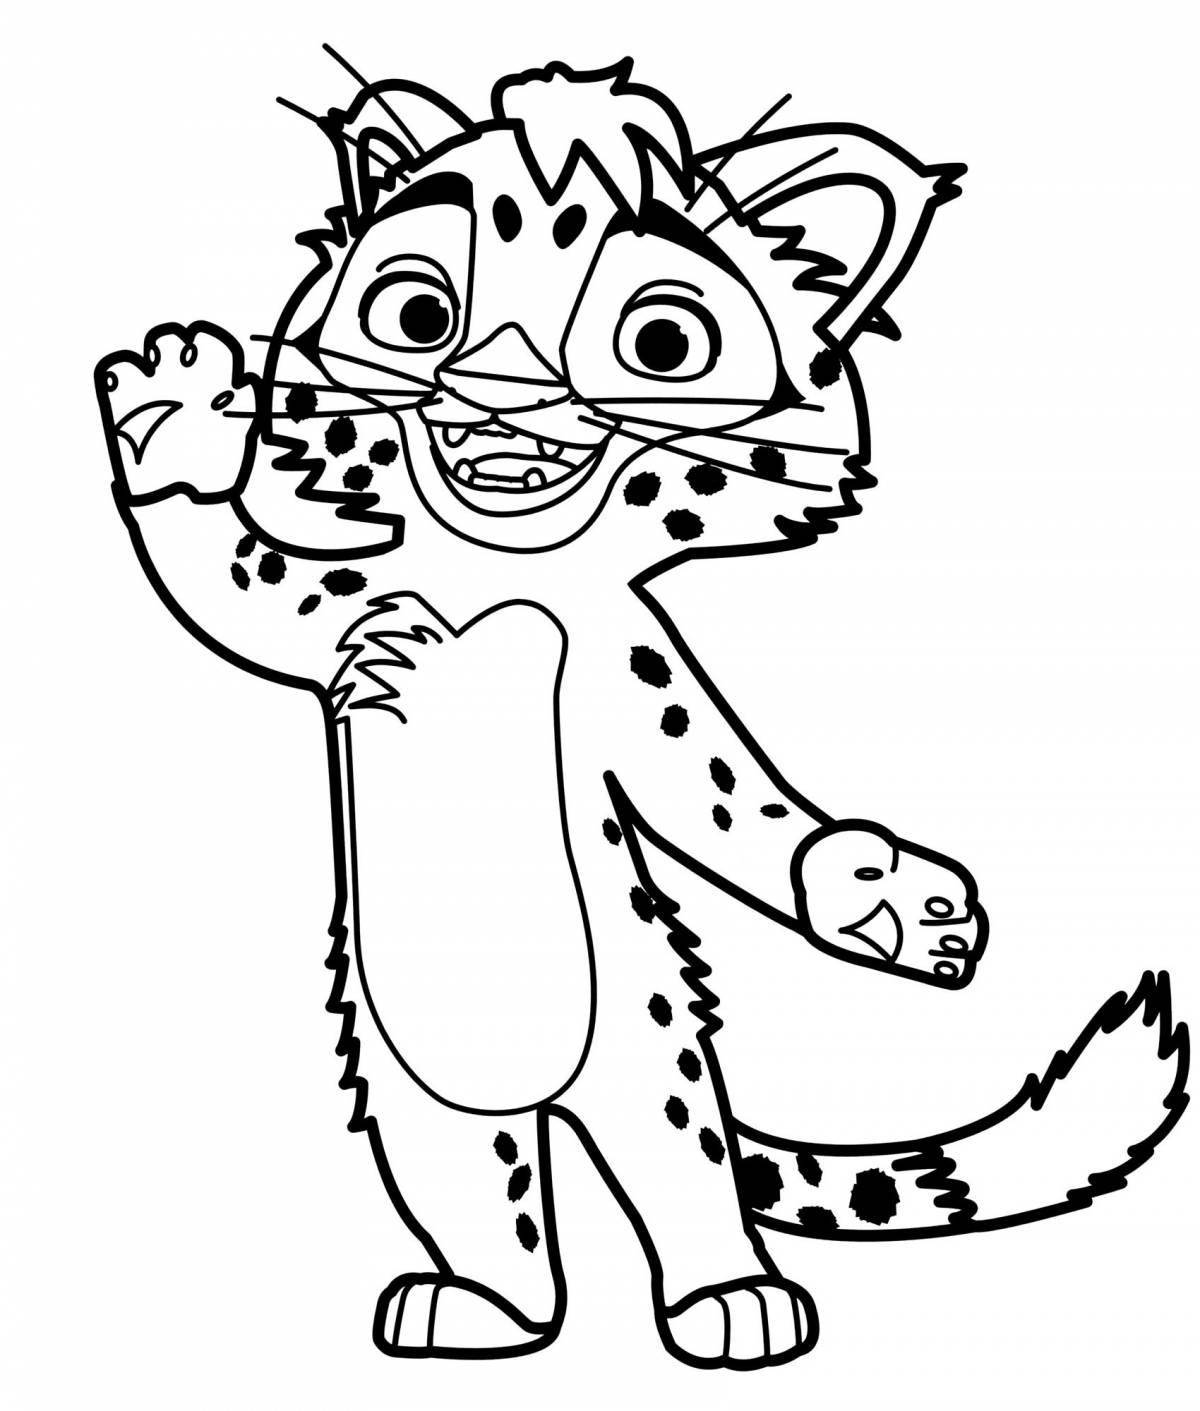 Great tiger and lion coloring book for kids